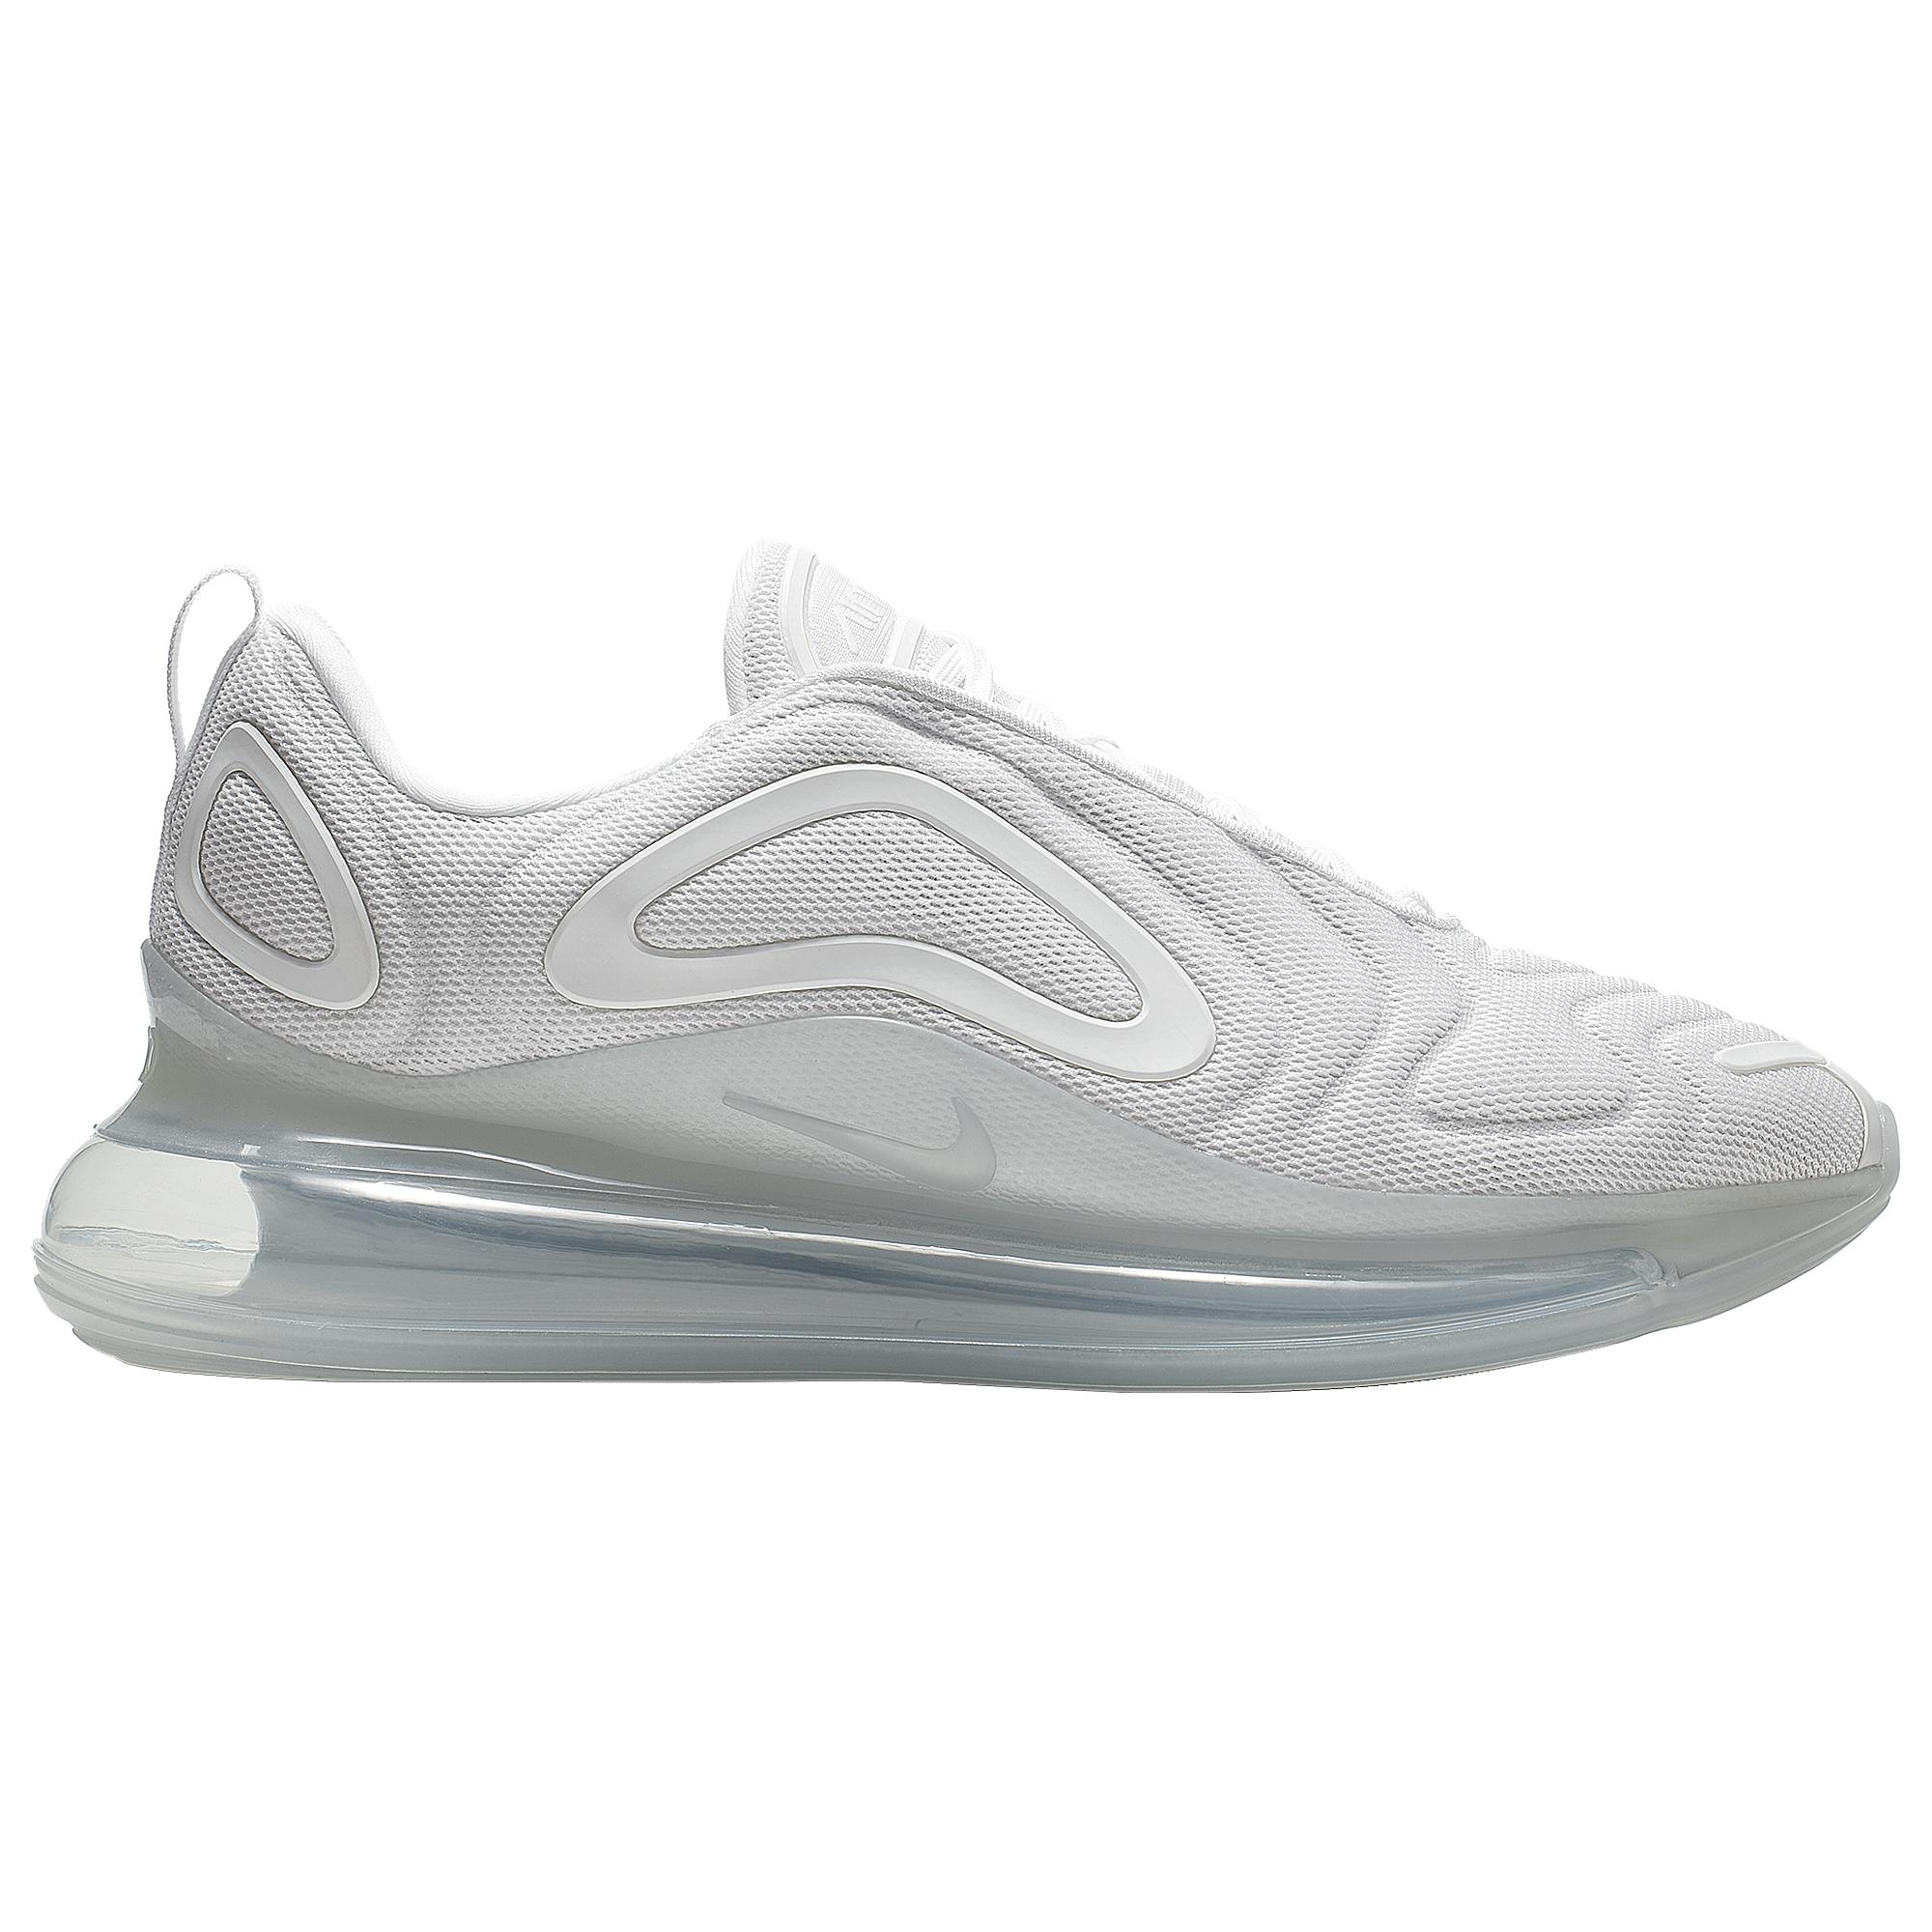 Nike Synthetic Air Max 720 - Shoes in White/White (White) for Men - Lyst